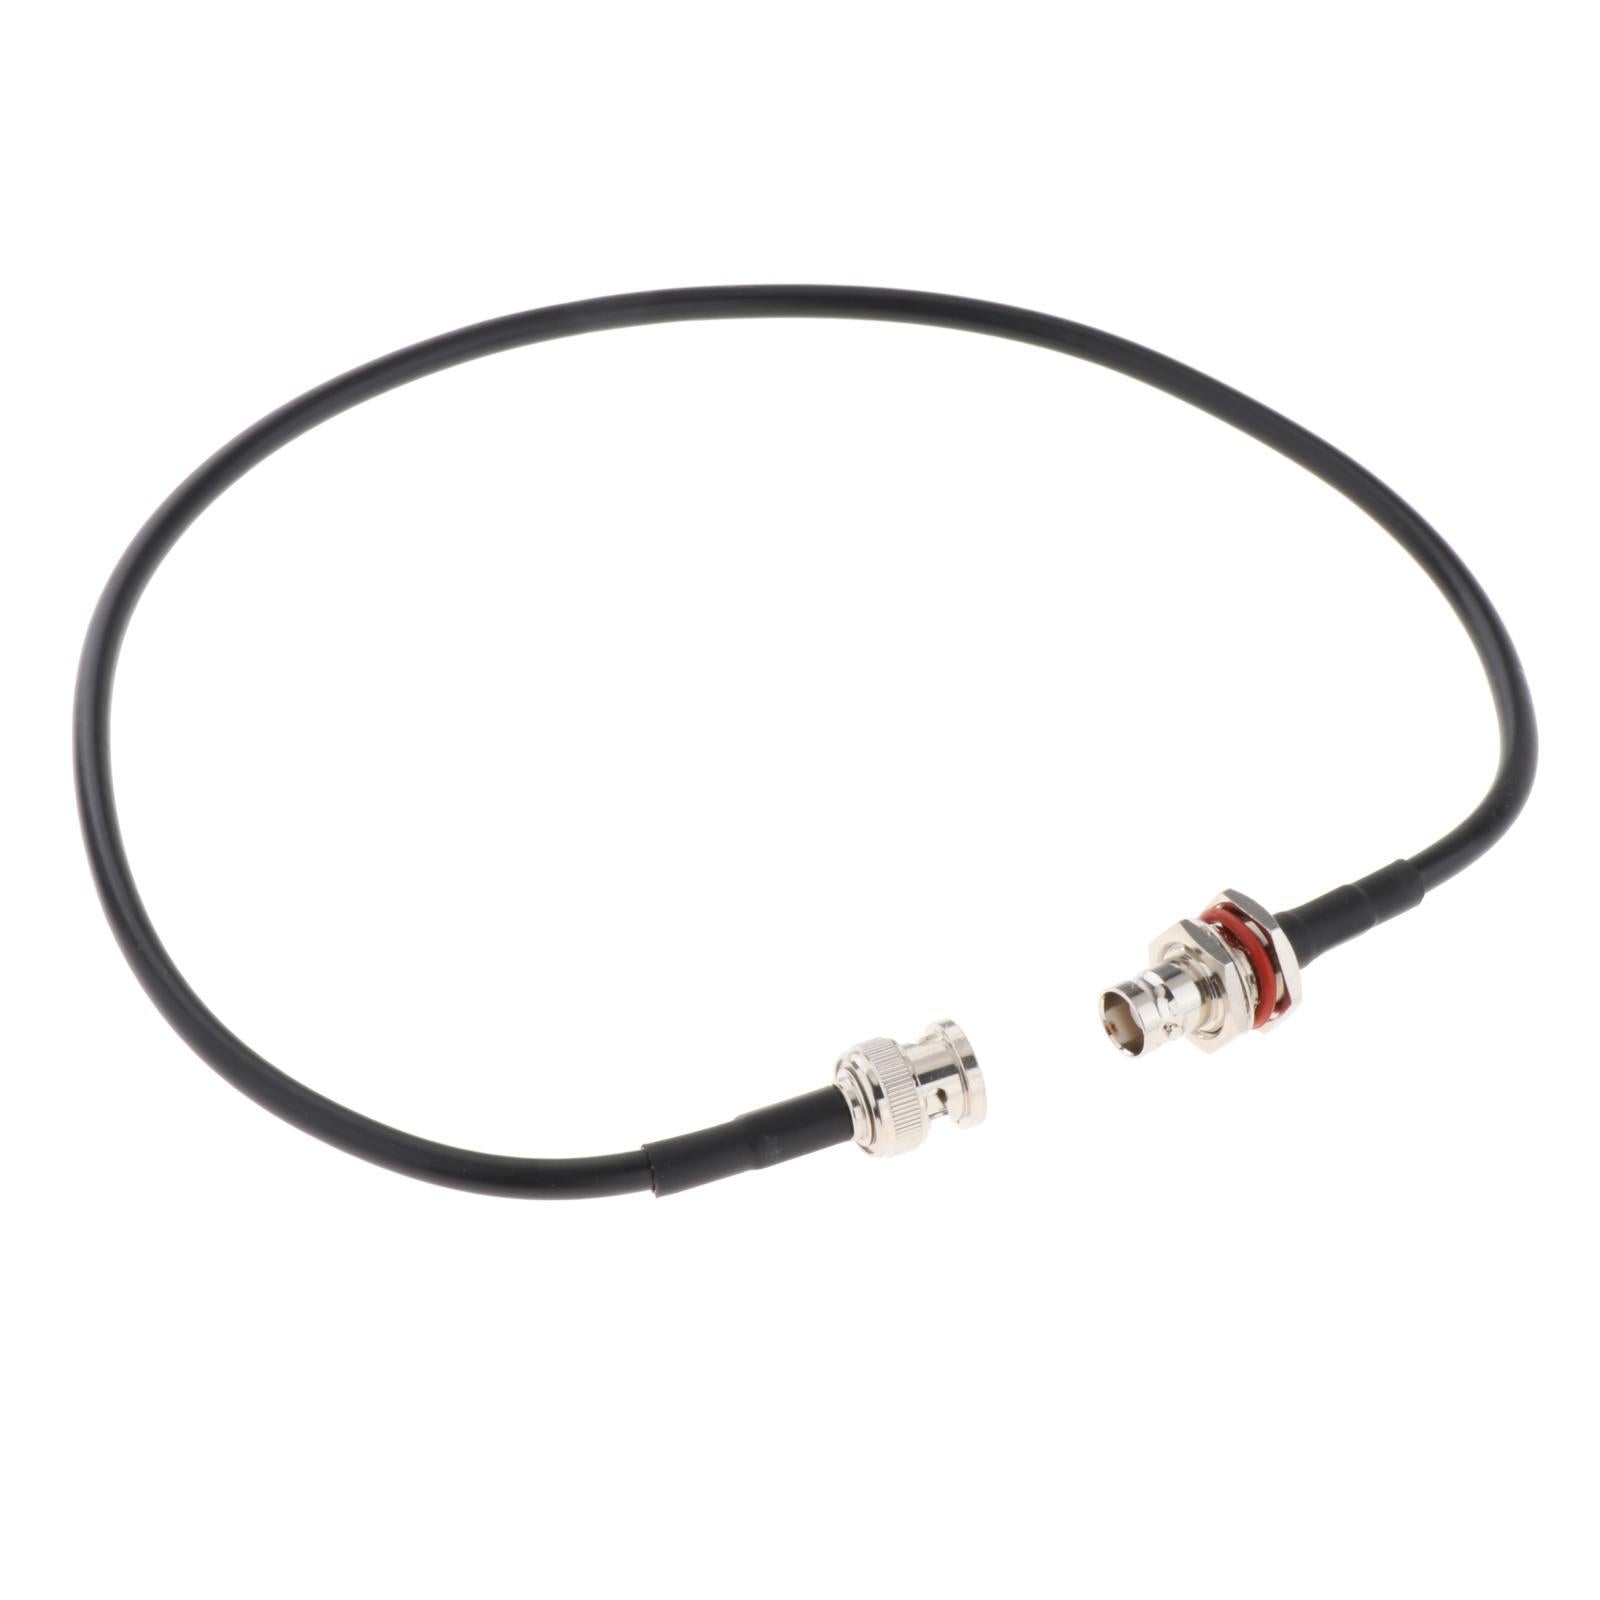 Zinc Alloy Extended Cable Hypercardioid for Wireless Microphones Systems